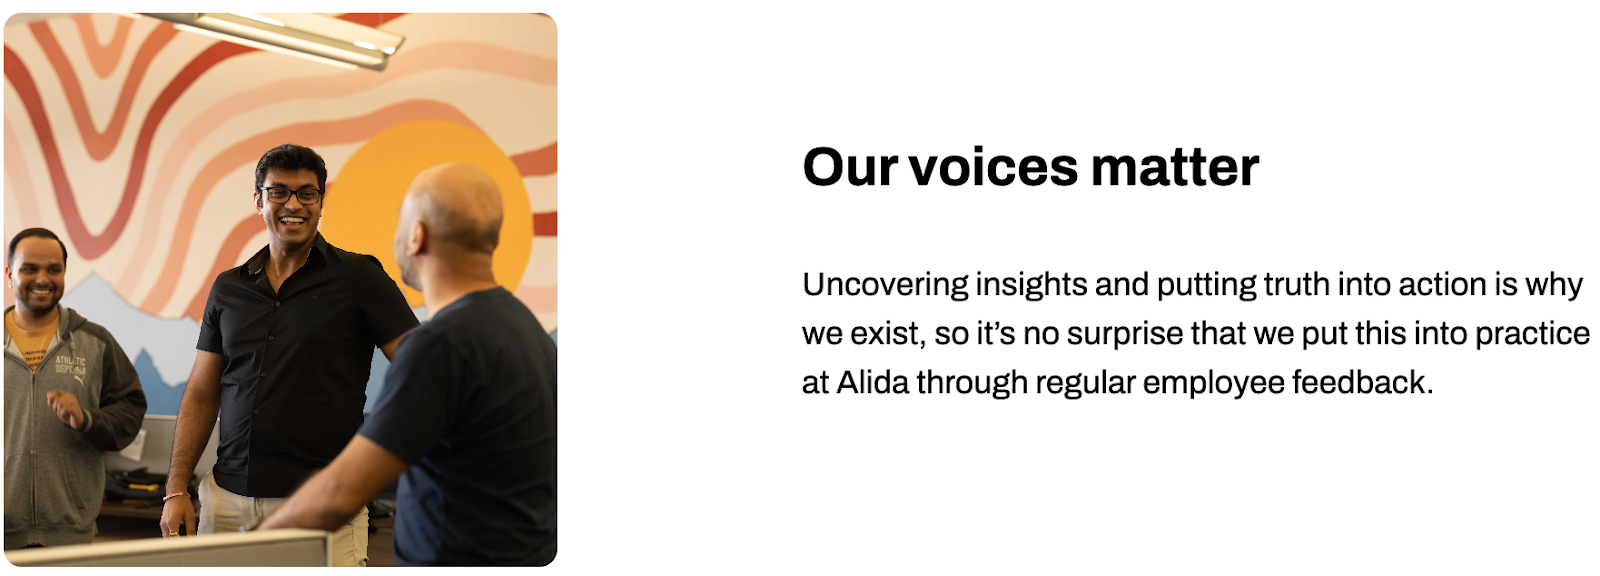 Alida walks its talk when it comes to respecting its employees as the ultimate source of truth. 